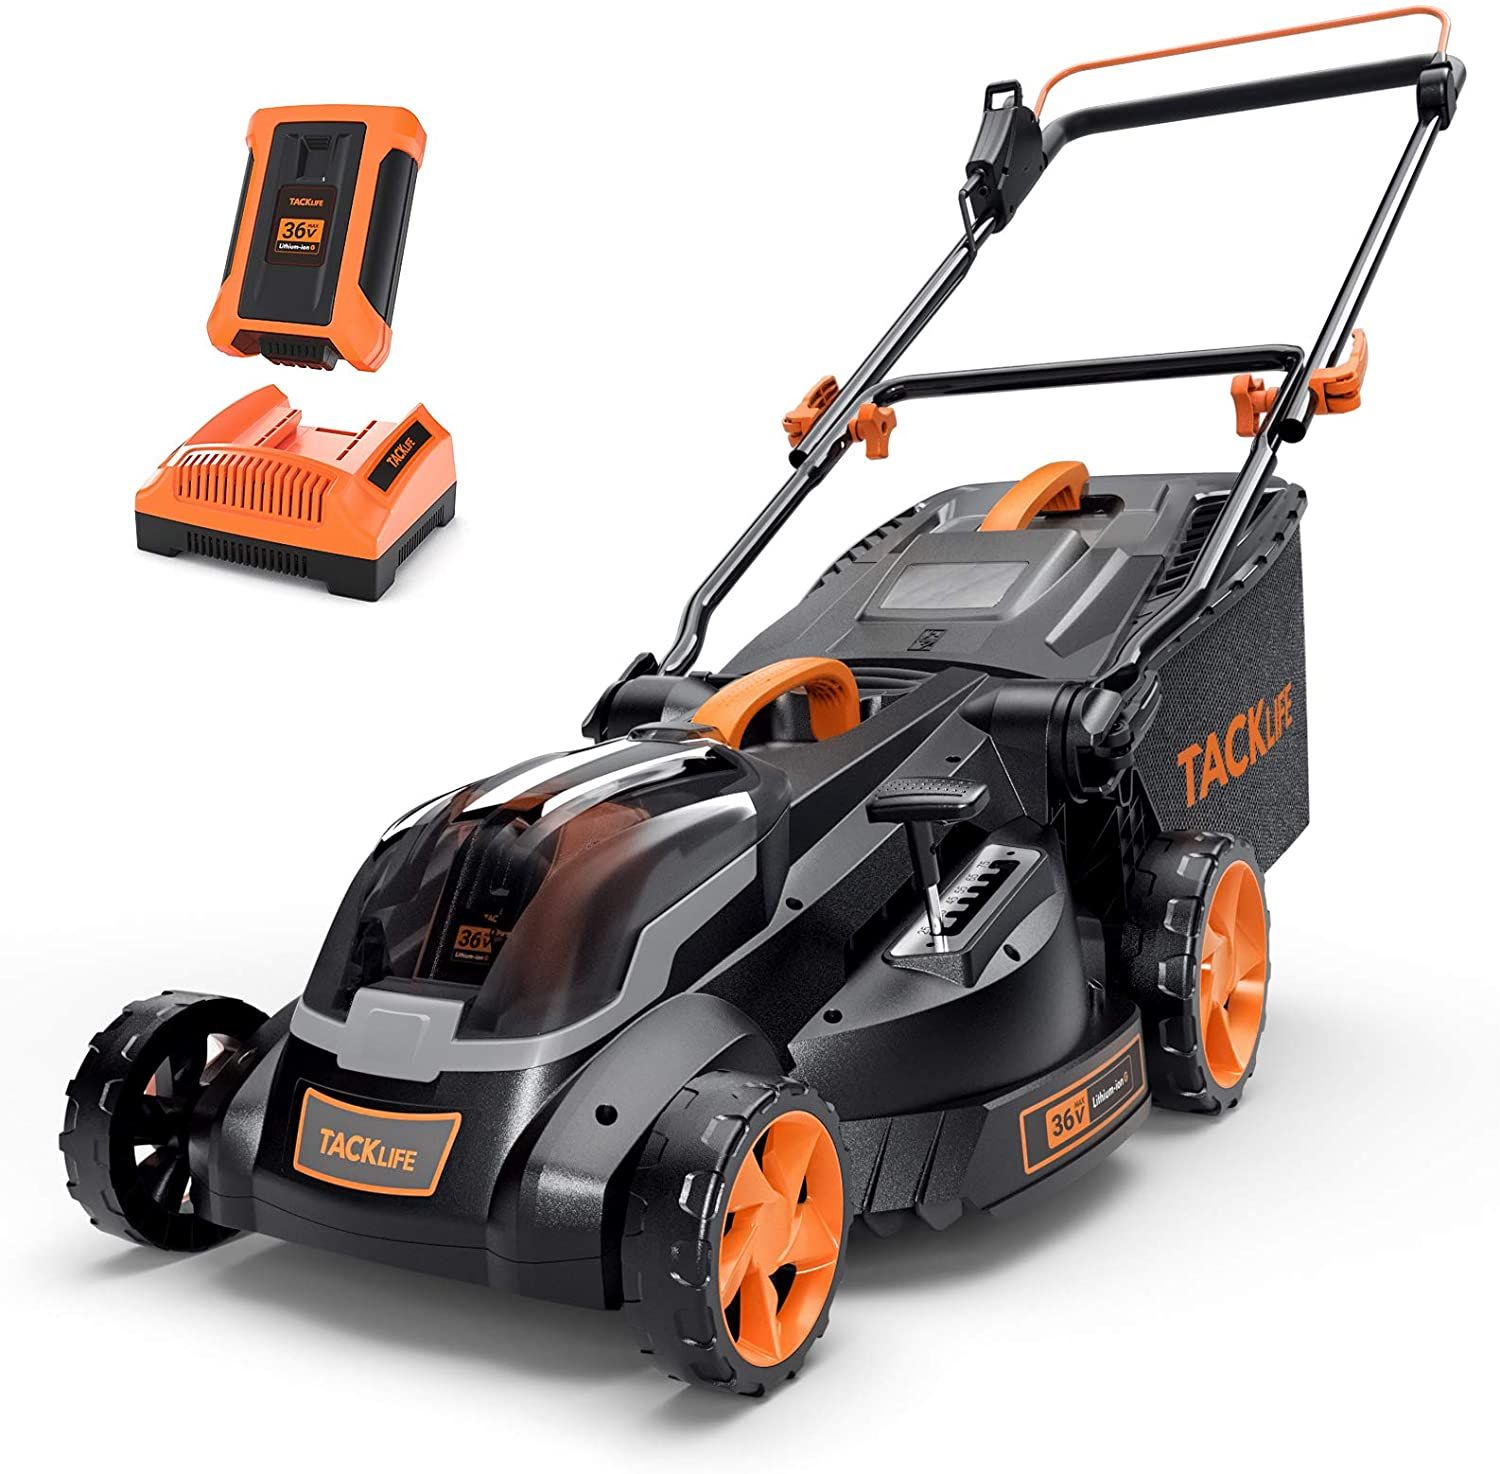 The 10 Best Electric Lawn Mowers of 2021 - ReviewThis